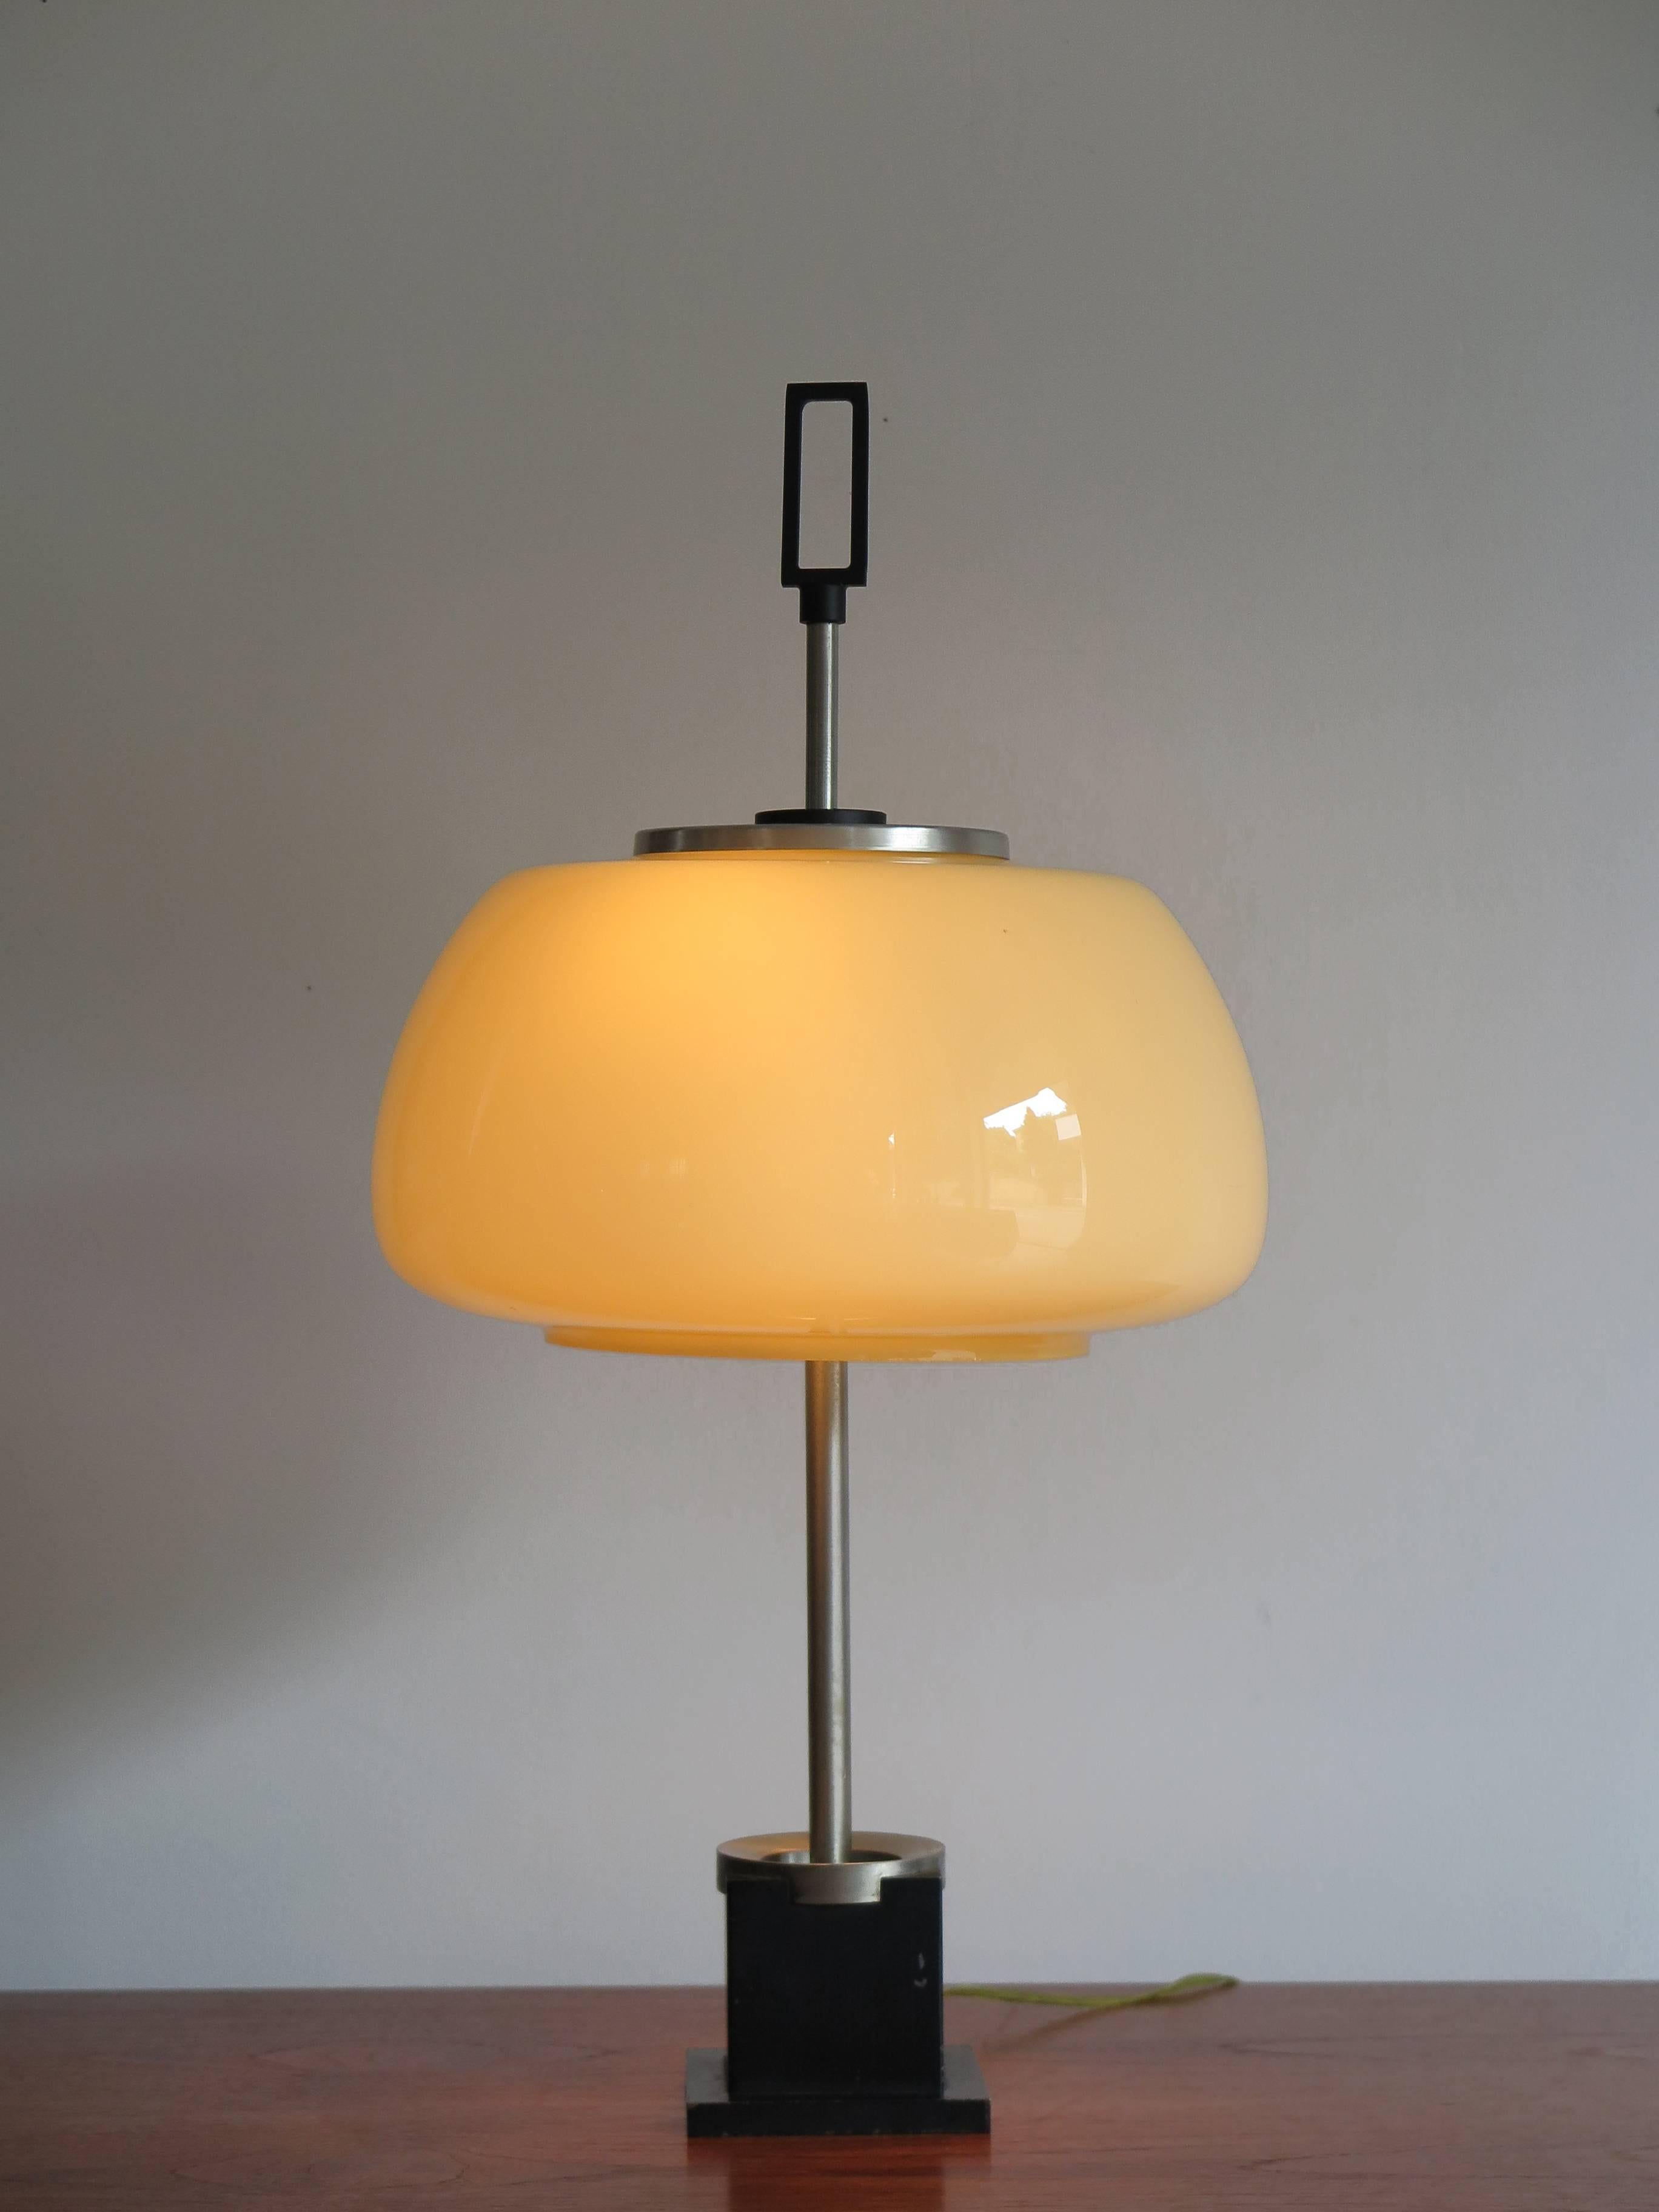 1950s Italian table lamp or desk lamp produced by Lumi with a diffuser in colored jacketed glass, base in painted cast iron and structure in matte nickel-plated brass.